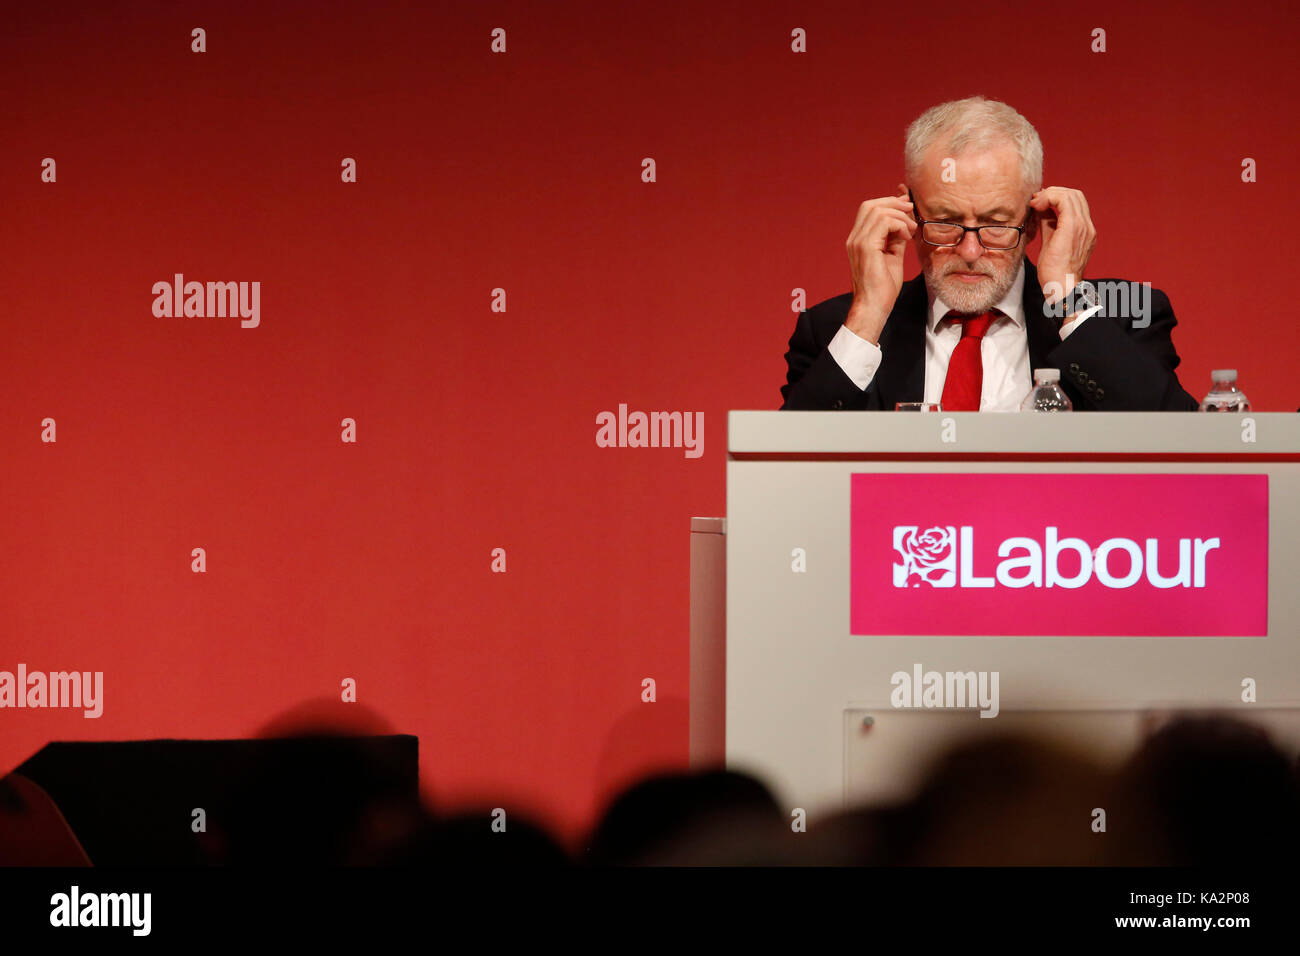 Brighton, UK. 24th September, 2017. Jeremy Corbyn, leader of Britain's opposition Labour party adjusts his glasses during the annual Labour Party Conference in Brighton, UK Sunday, September 24, 2017. Photograph : Credit: Luke MacGregor/Alamy Live News Stock Photo